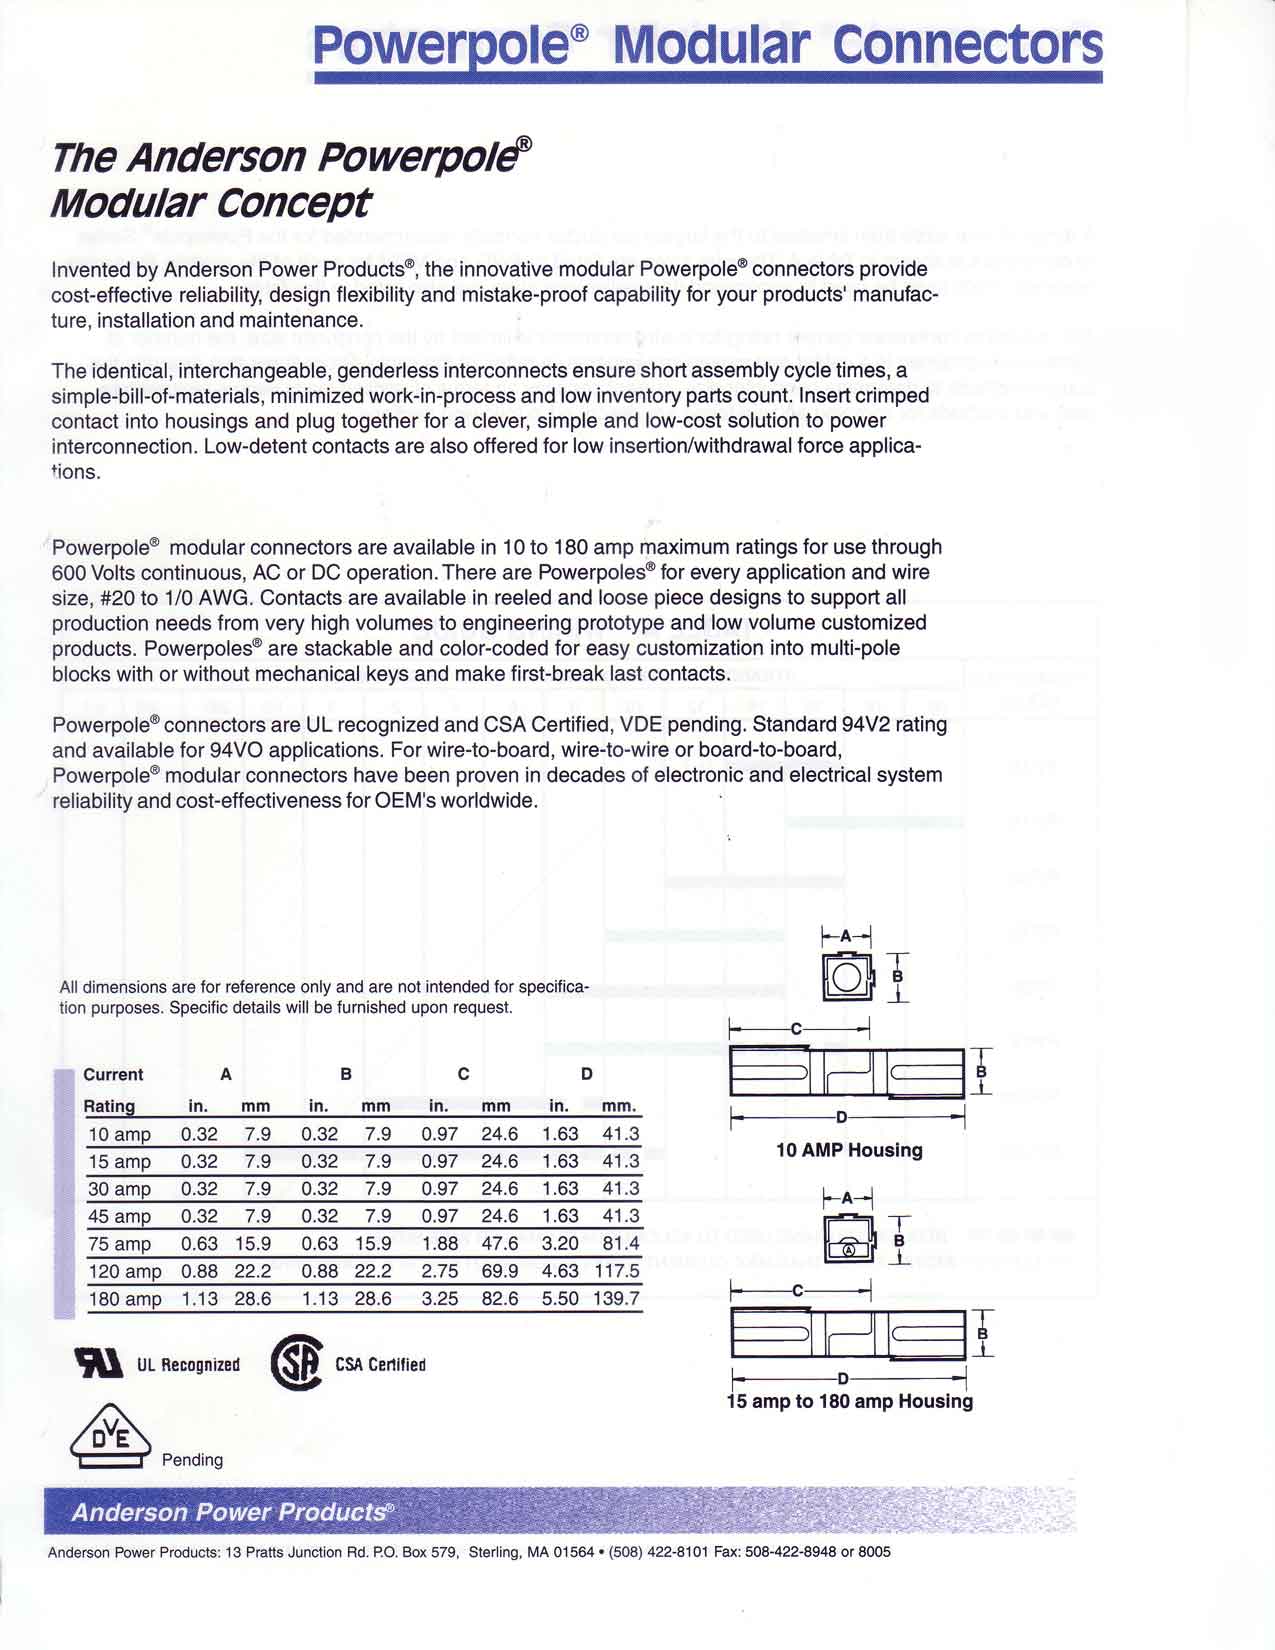 Powerpole Modular Connectors, Anderson Power Products